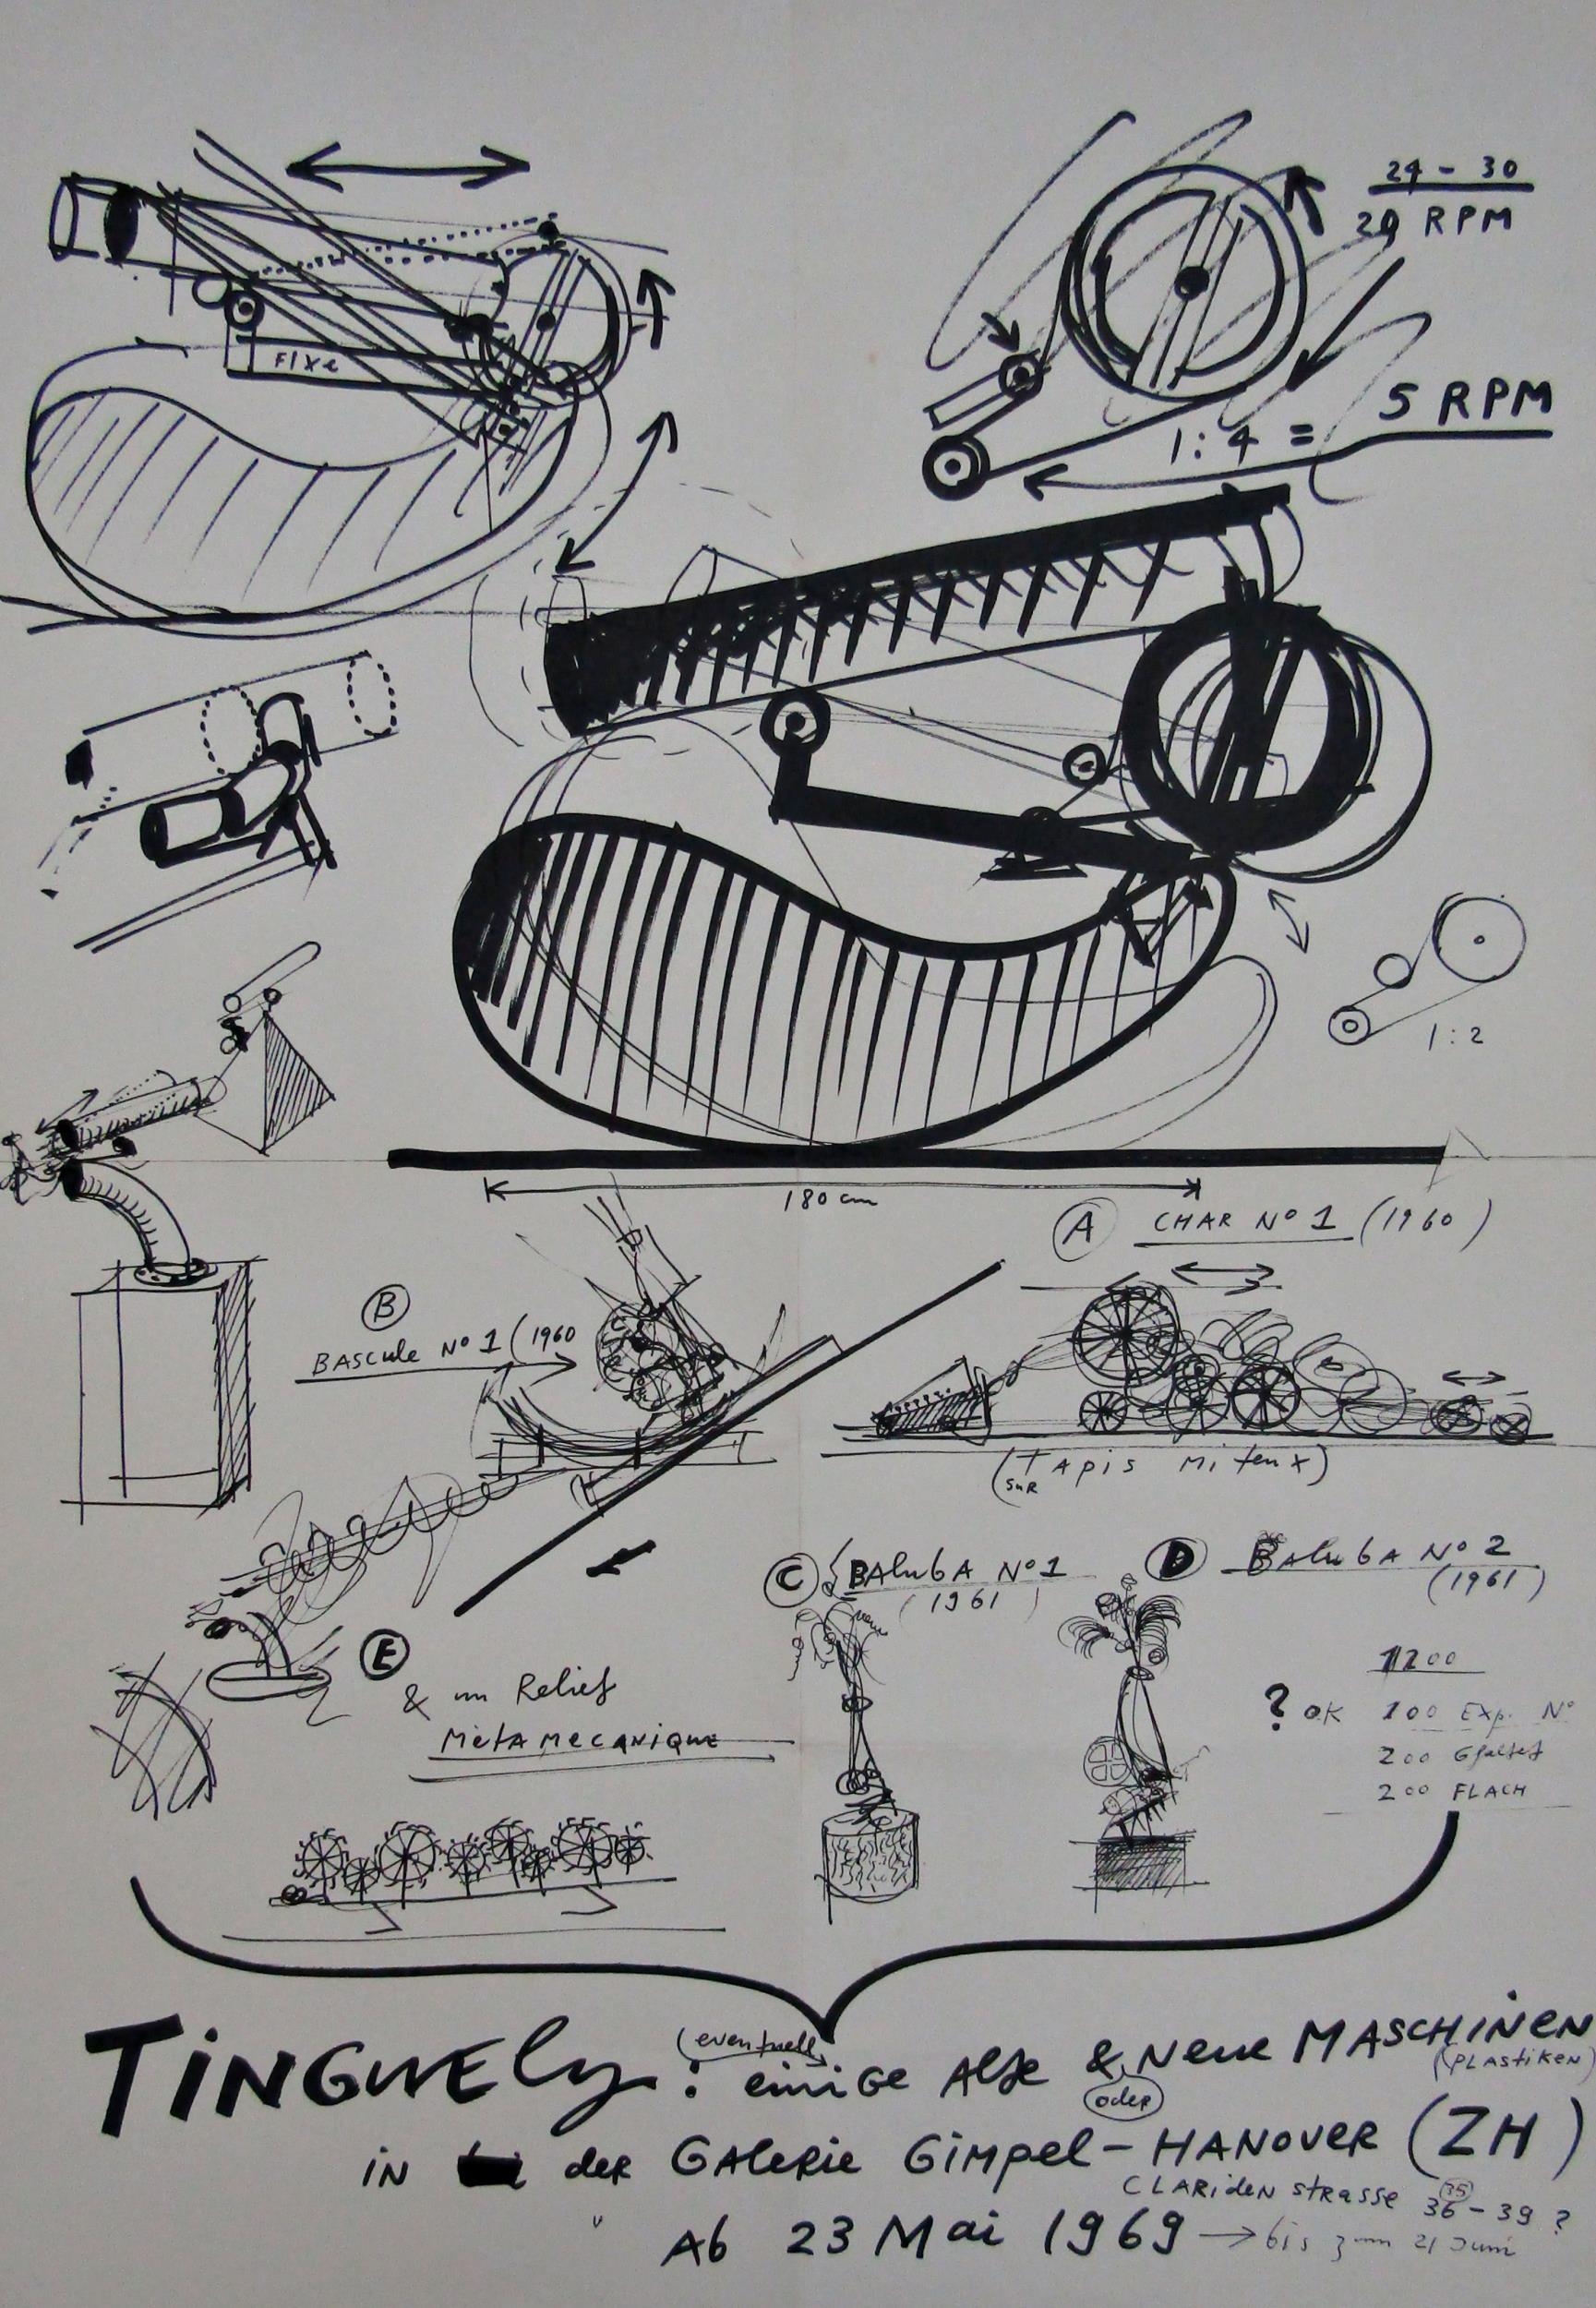 JEAN TINGUELY (1925-1991) 'SOME OLD AND NEW MACHINES' off-set lithograph, printed for Gimpel-Hanover